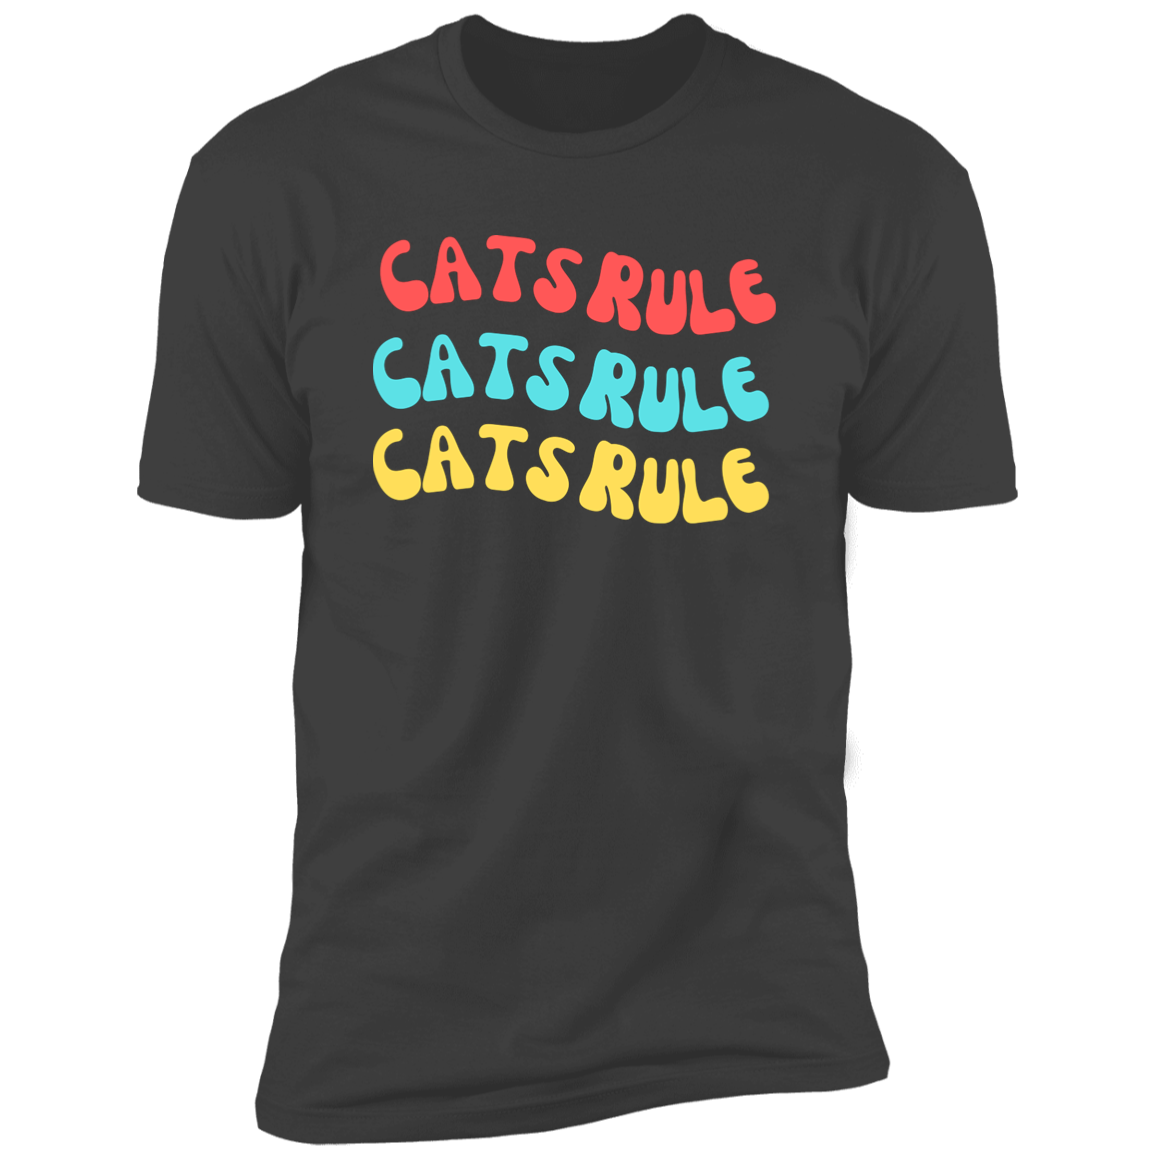 Cats Rule T-shirt, Cat Shirt for humans, in heavy metal gray